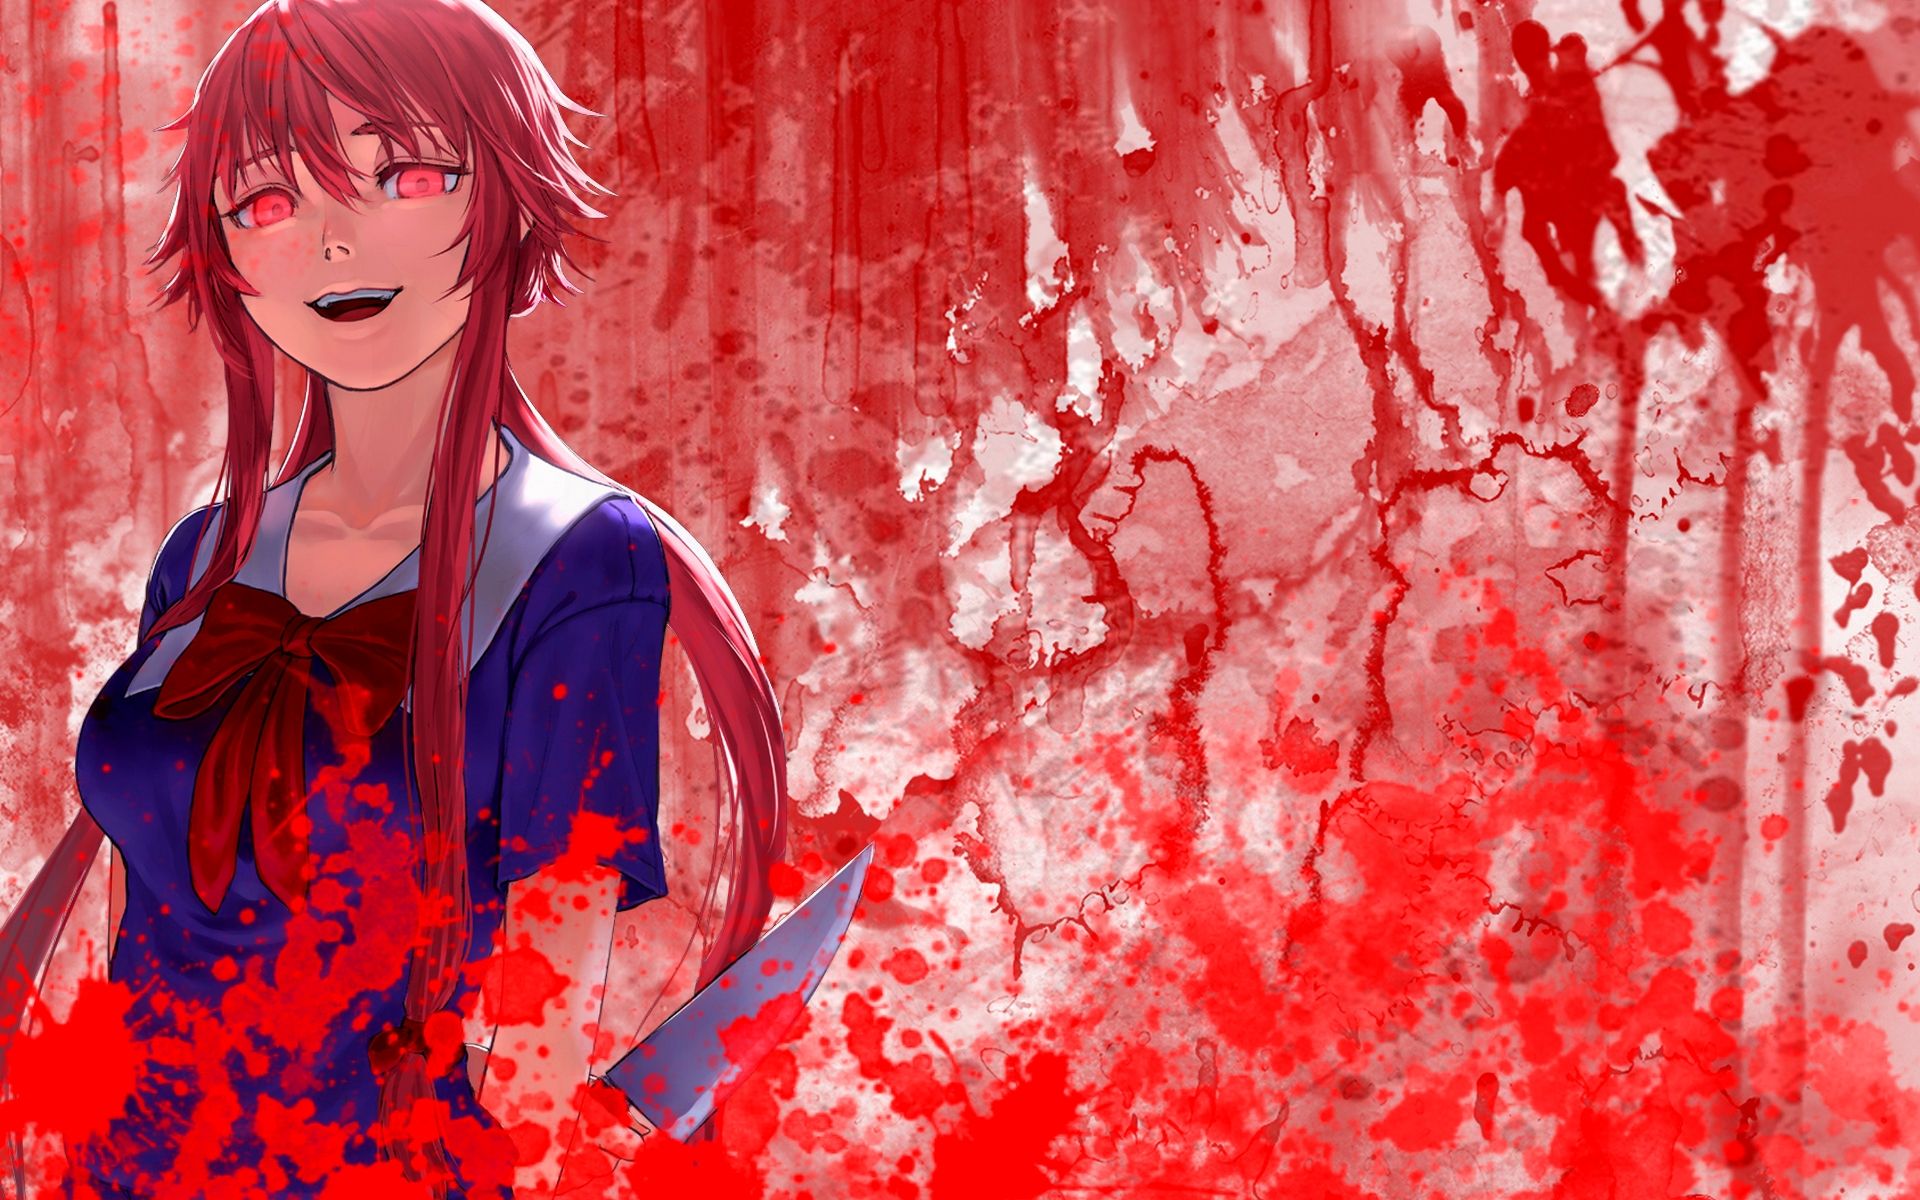 Best 48+ Future Diary Desktop Backgrounds on HipWallpapers.